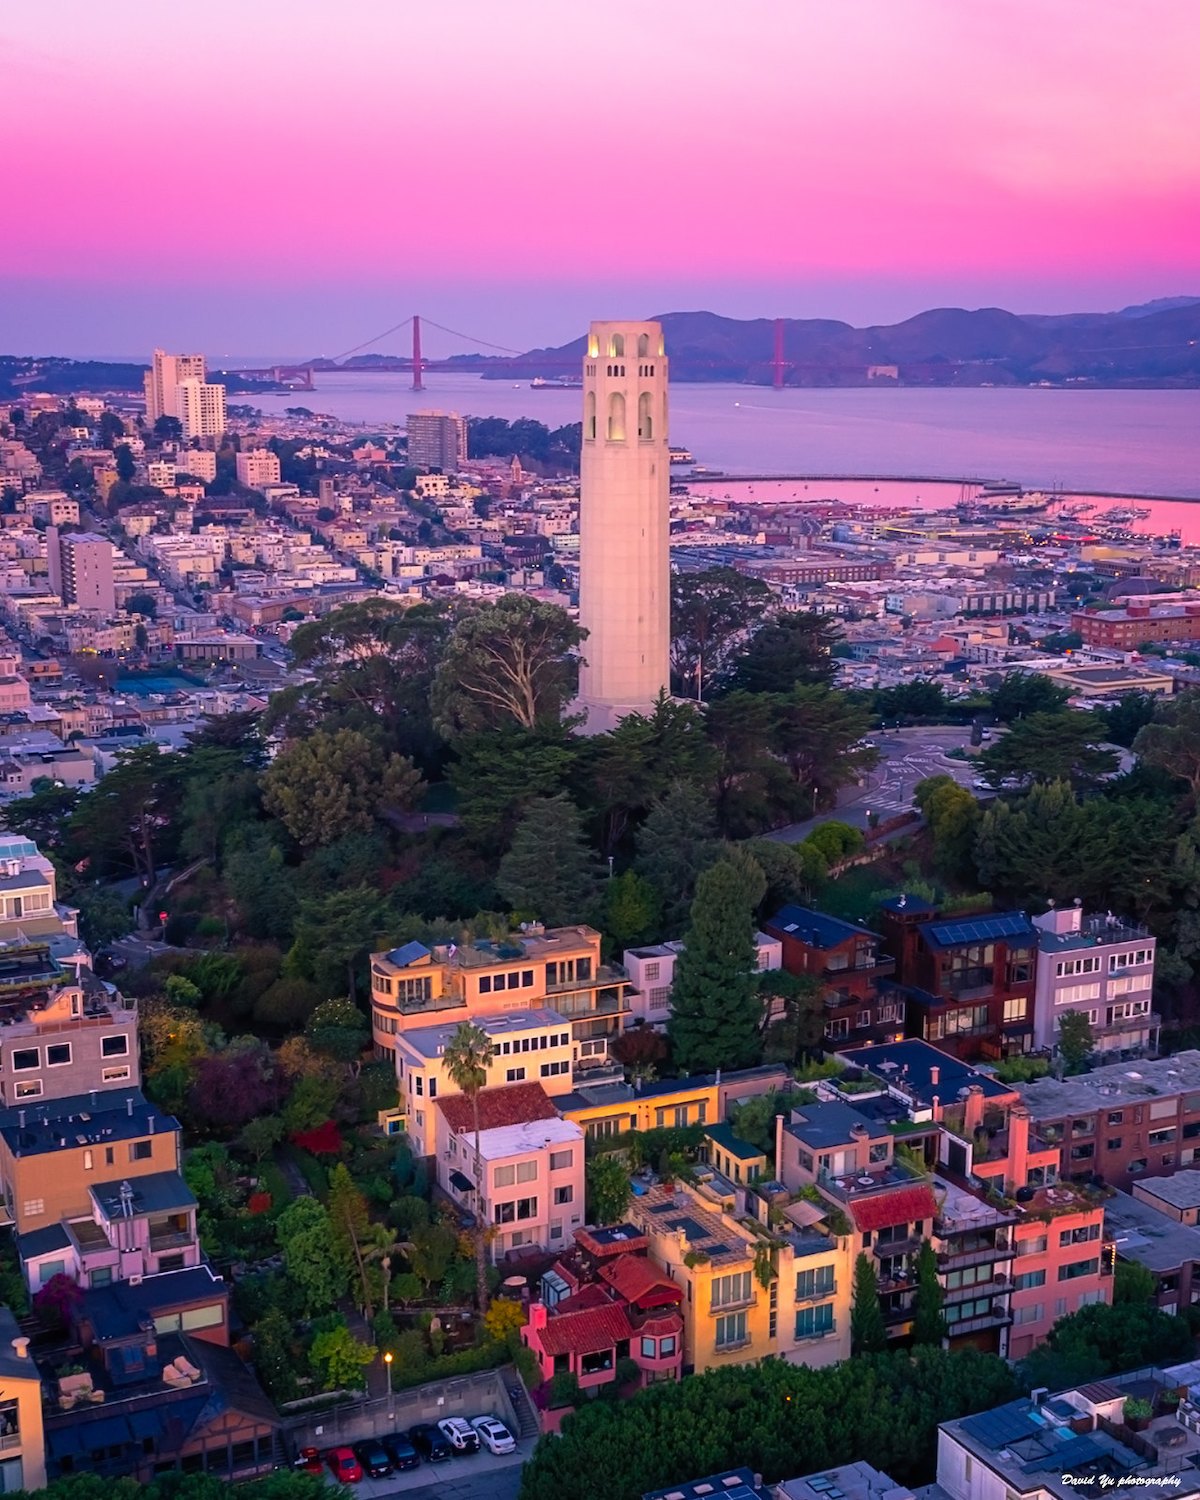 A landscape shot of San Francisco at sunrise. The Golden gate bridge stretches in the distance, and the Coit Tower in the foreground rises above the trees and surrounding buildings